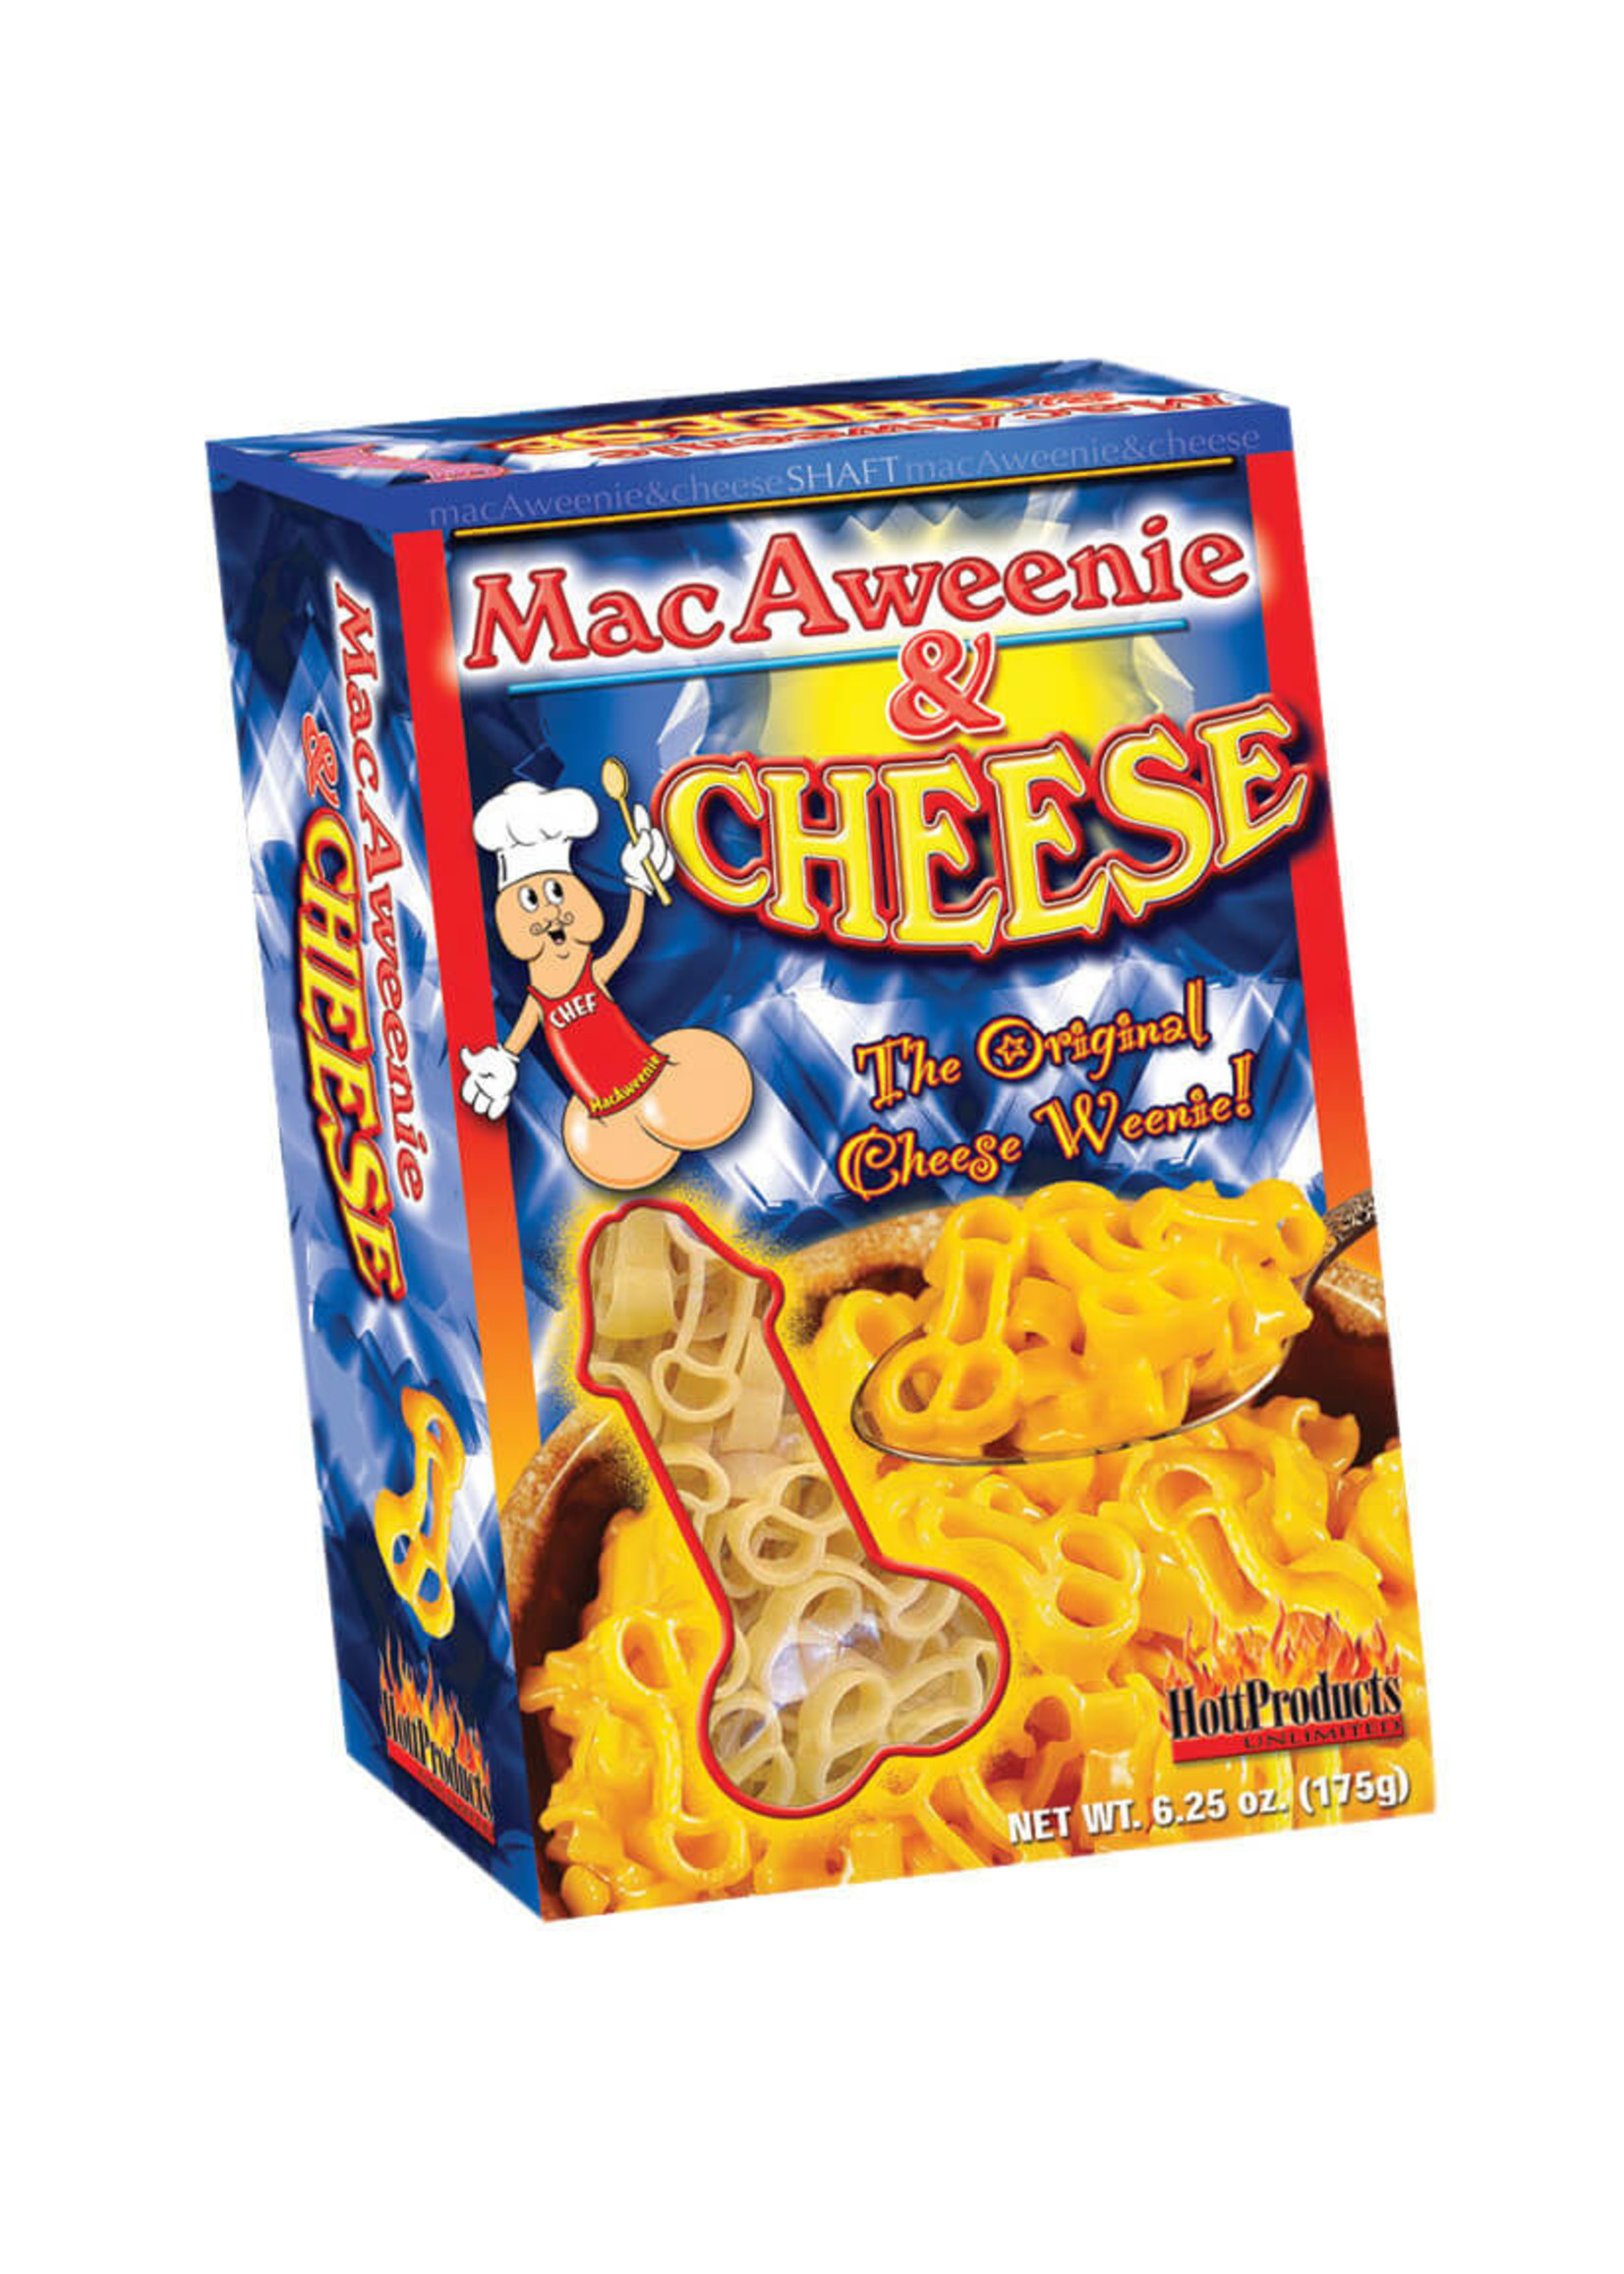 Hott Products Unlimited MacAweenie & Cheese 6.25oz